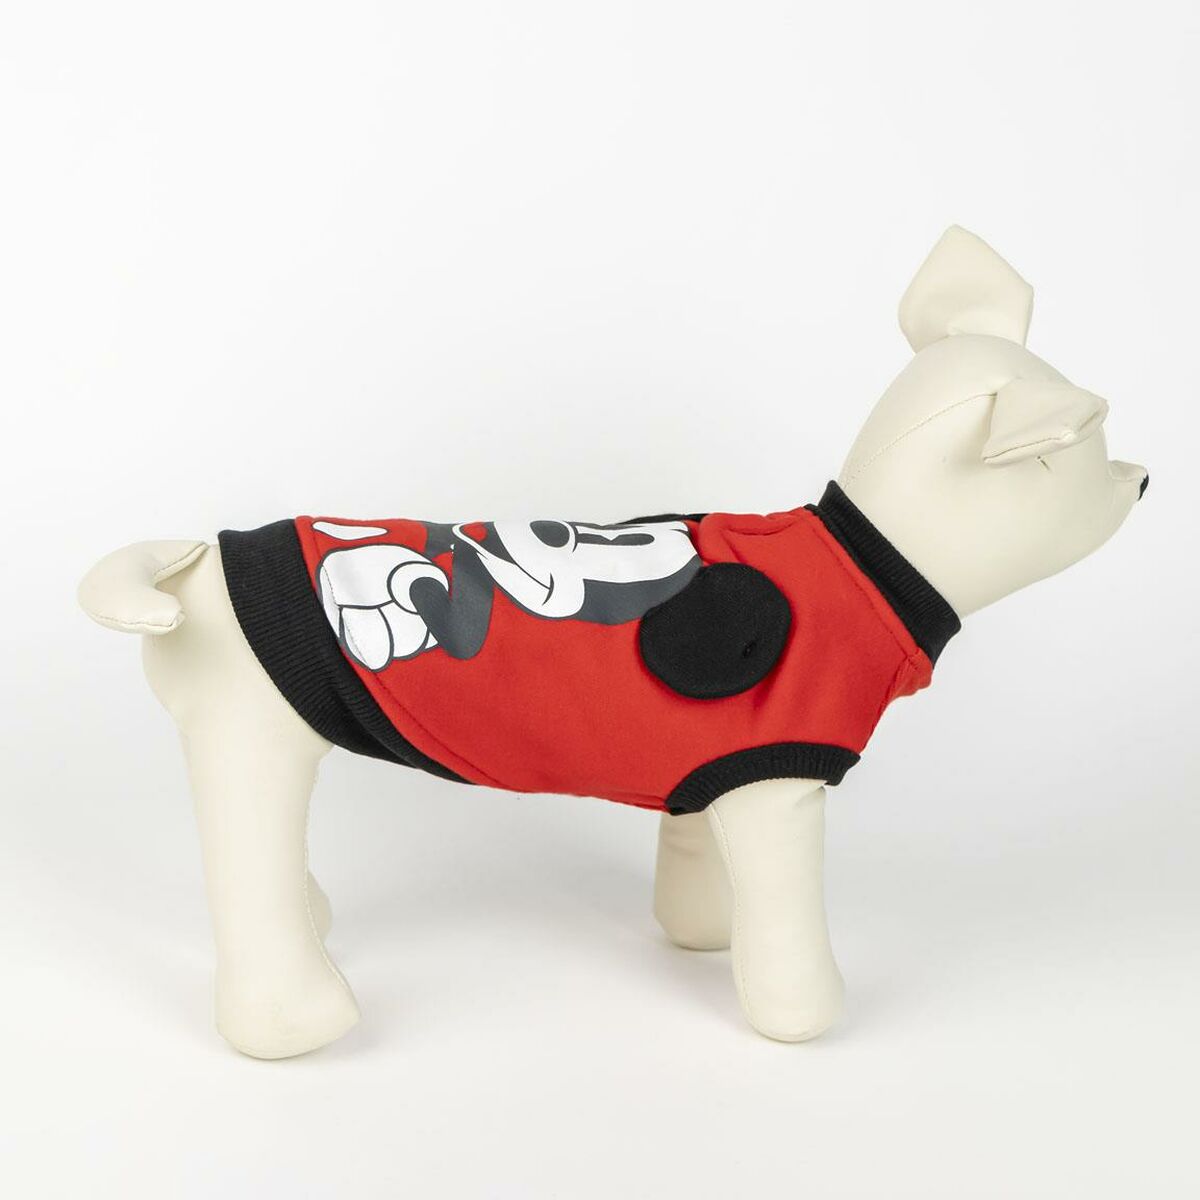 Dog Sweatshirt Mickey Mouse S Red